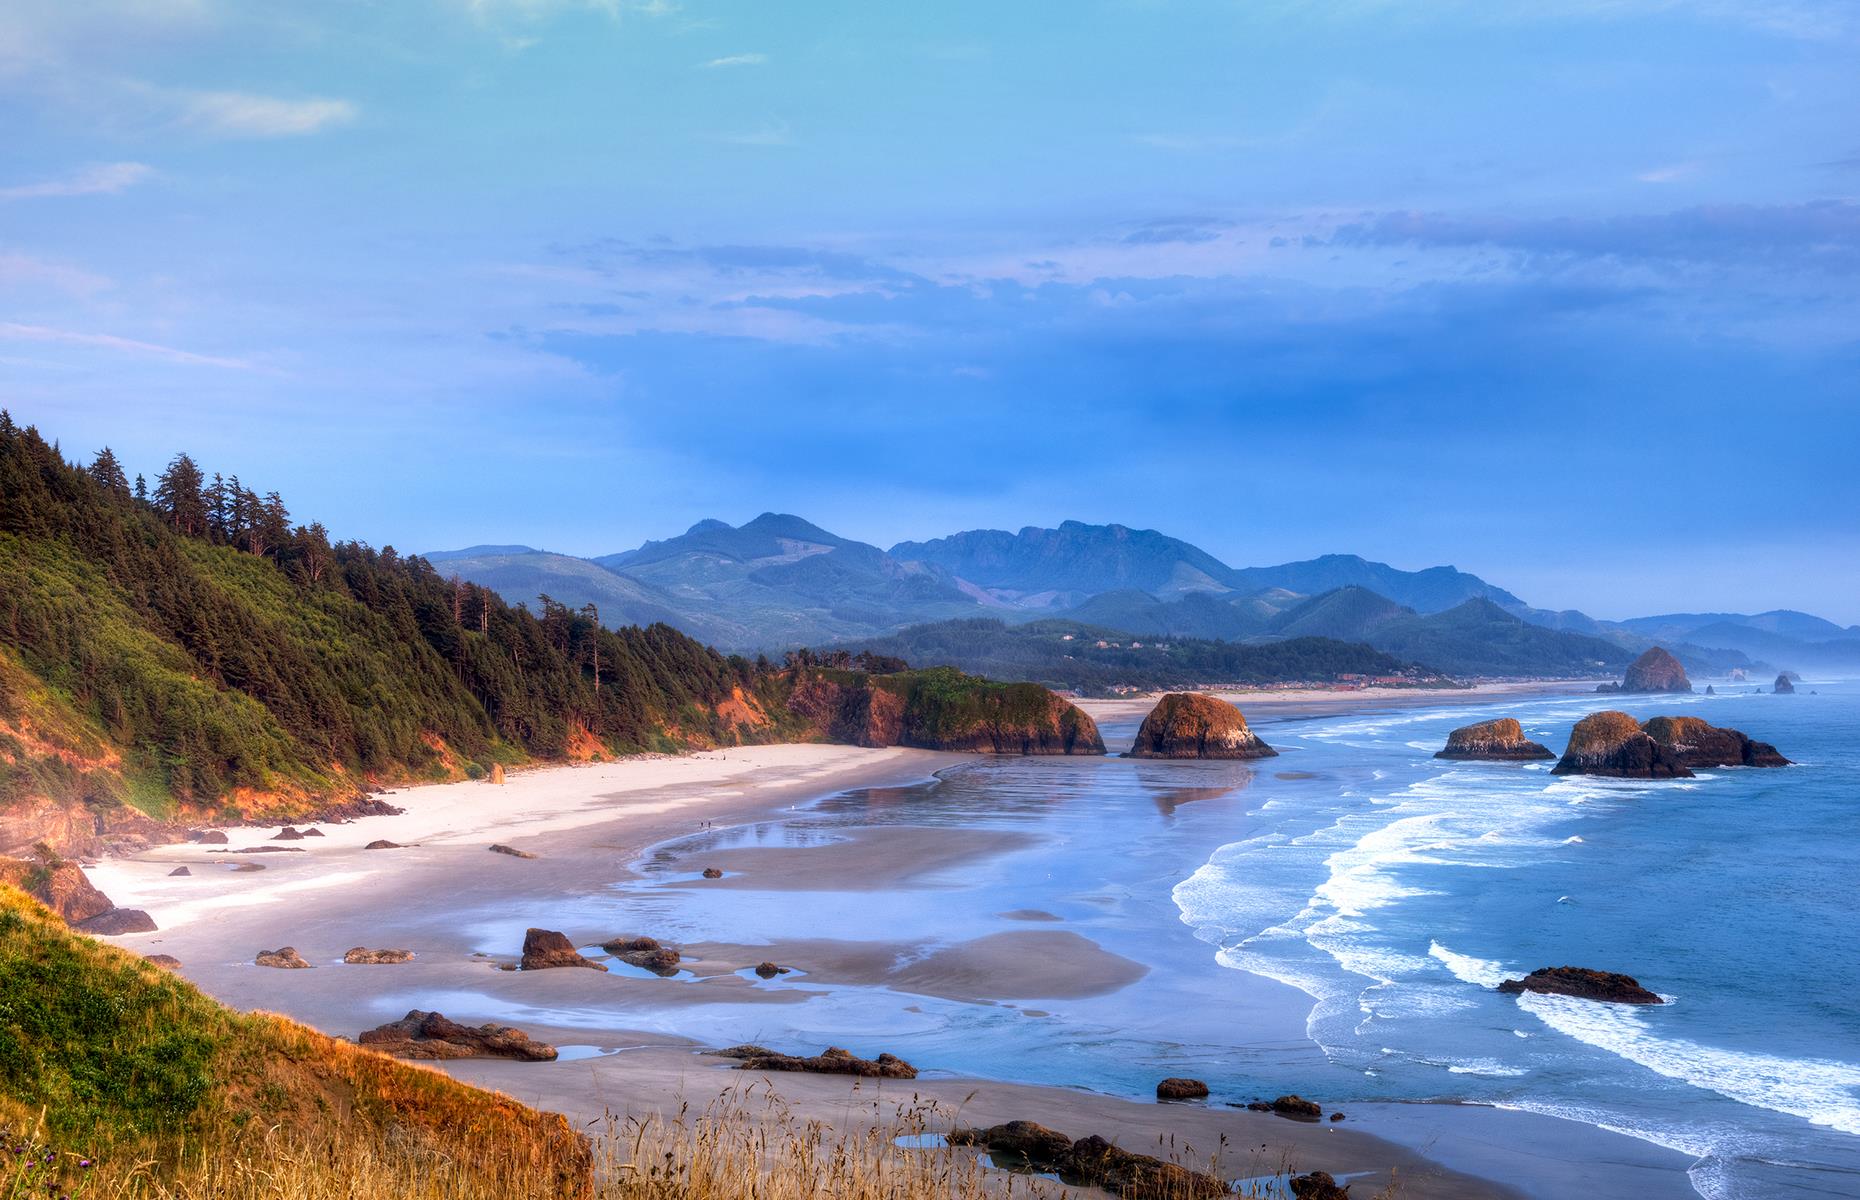 <p>This destination in northwest Oregon is a top weekend getaway for the locals living in the area and has a rich offering of microbreweries. But its breathtaking beach is the main attraction. The most recognizable landmark, the Haystack Rock, stands 235 feet (72m) above the sprawling sandy beach. A perfect spot for tide pooling, wildlife viewing and surfing, it's close to the Ecola State Park, too, making it the ultimate nature escape. Check <a href="https://stateparks.oregon.gov/index.cfm?do=park.profile&parkId=136">the park website</a> and <a href="https://traveloregon.com/travel-alerts/">Travel Oregon</a> for the latest alerts and advisories.</p>